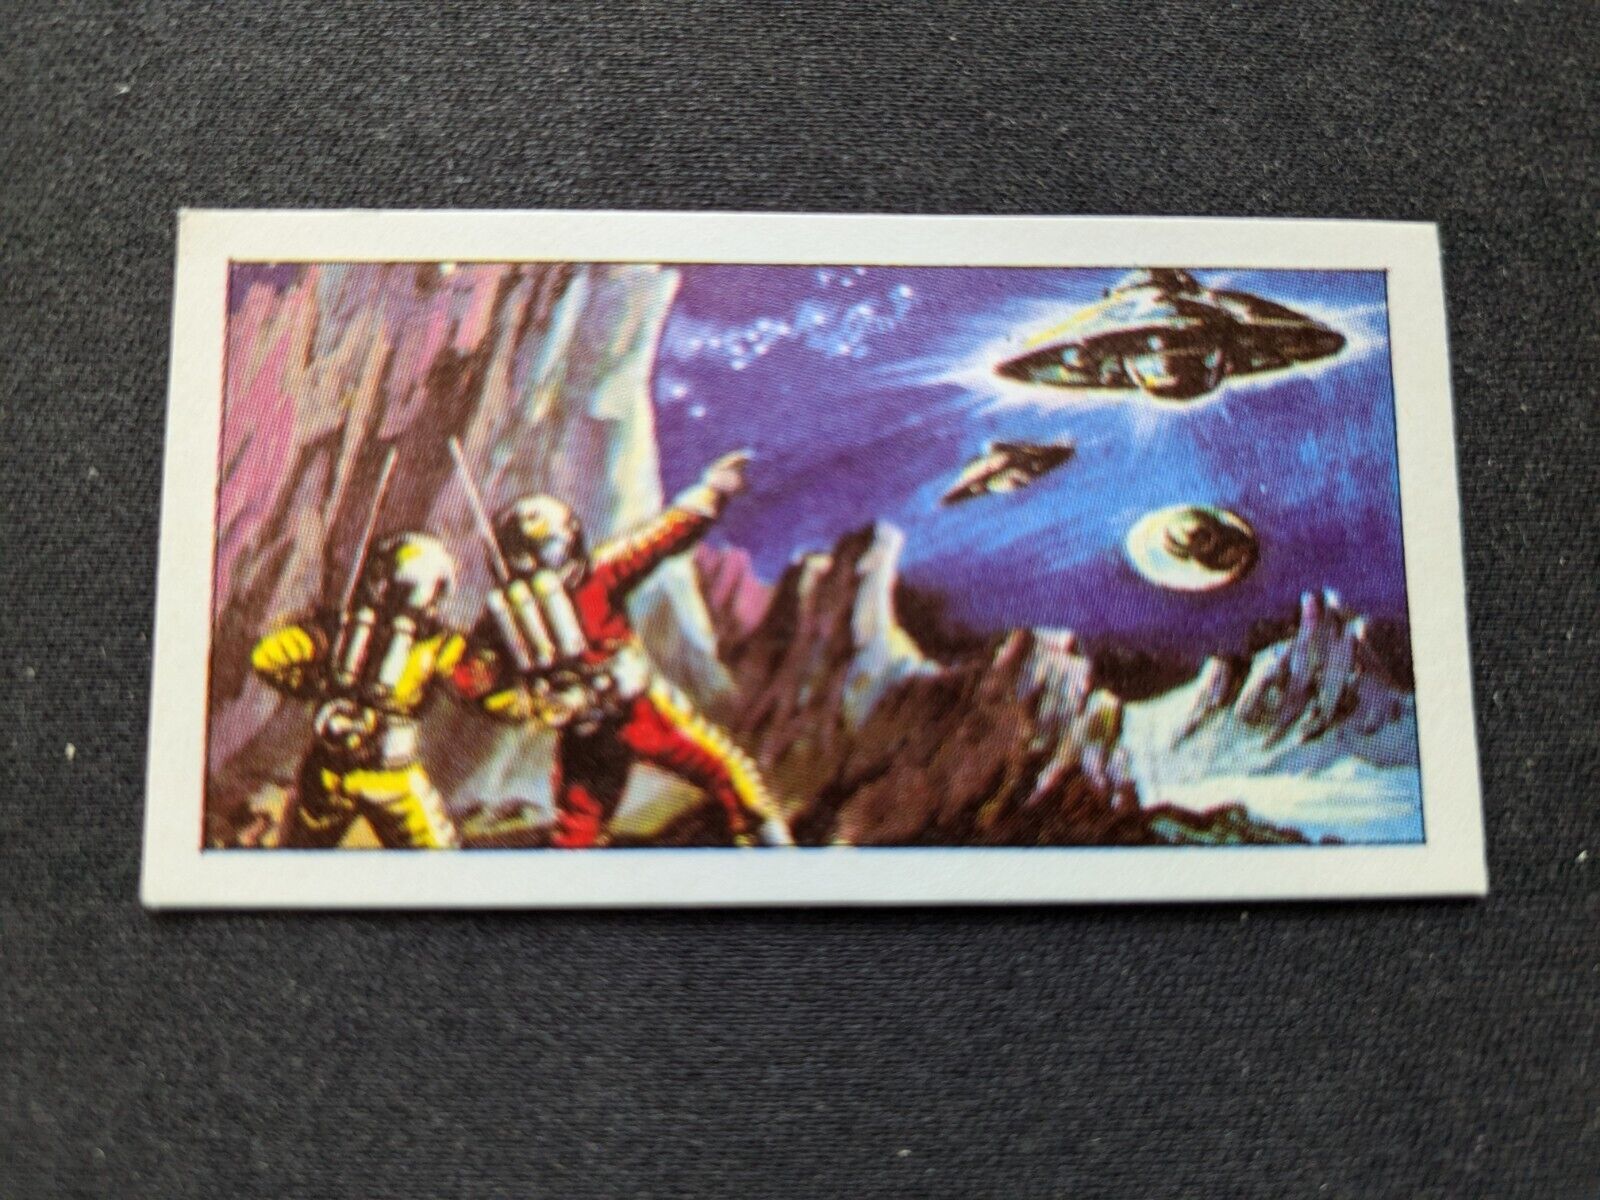 1969 Primrose Confectionery Space Race Card # 50 Life on Other Planets? (EX/NM)